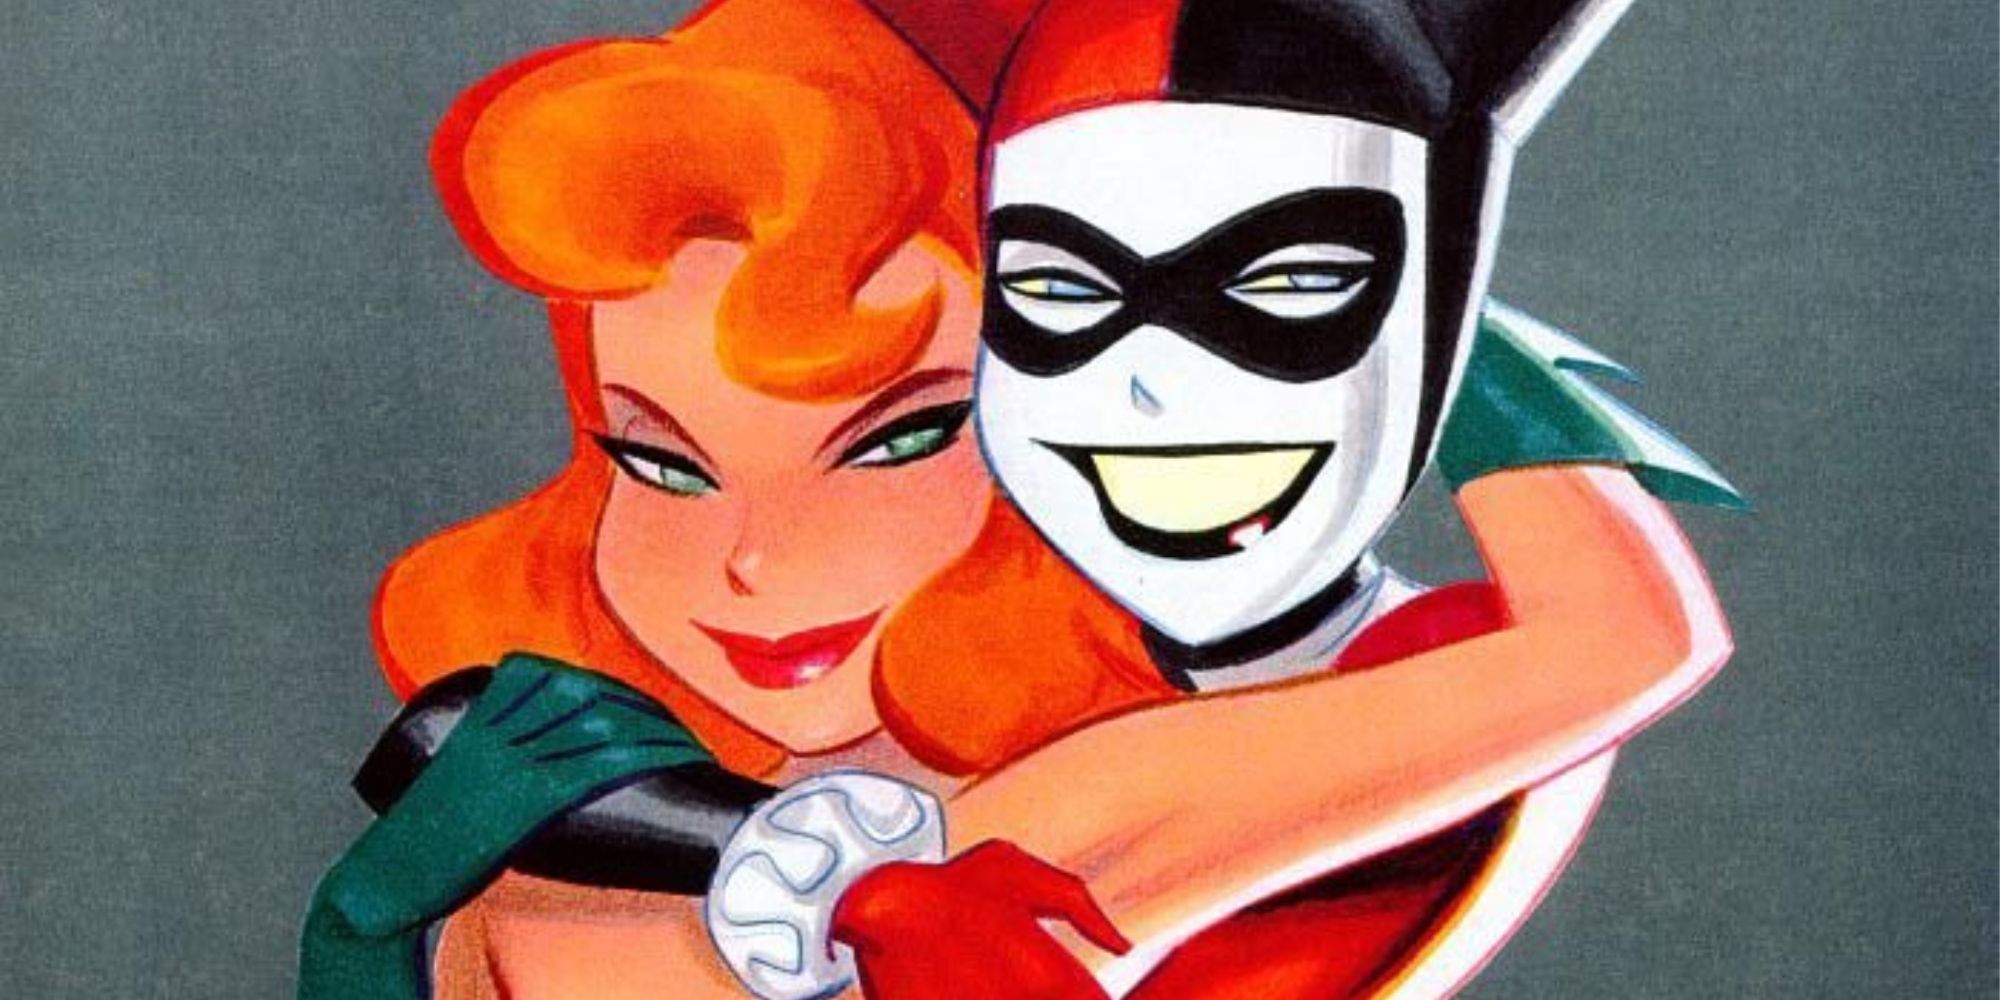 Poison Ivy and Harley Quinn embrace in Bruce Timm art.